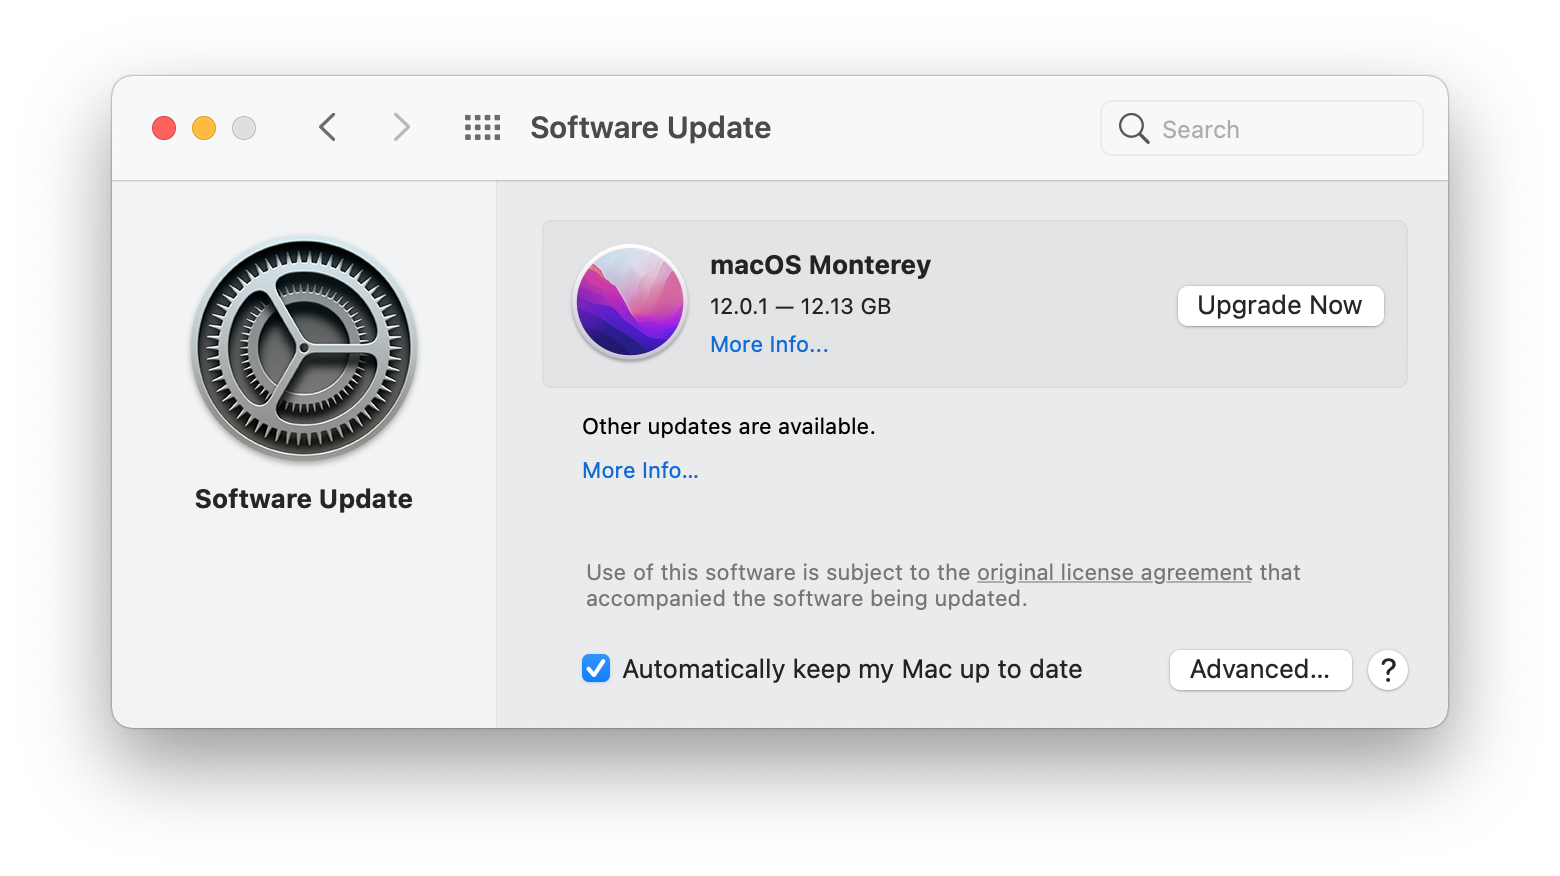 software update window showing the Upgrade button for macOS Monterey